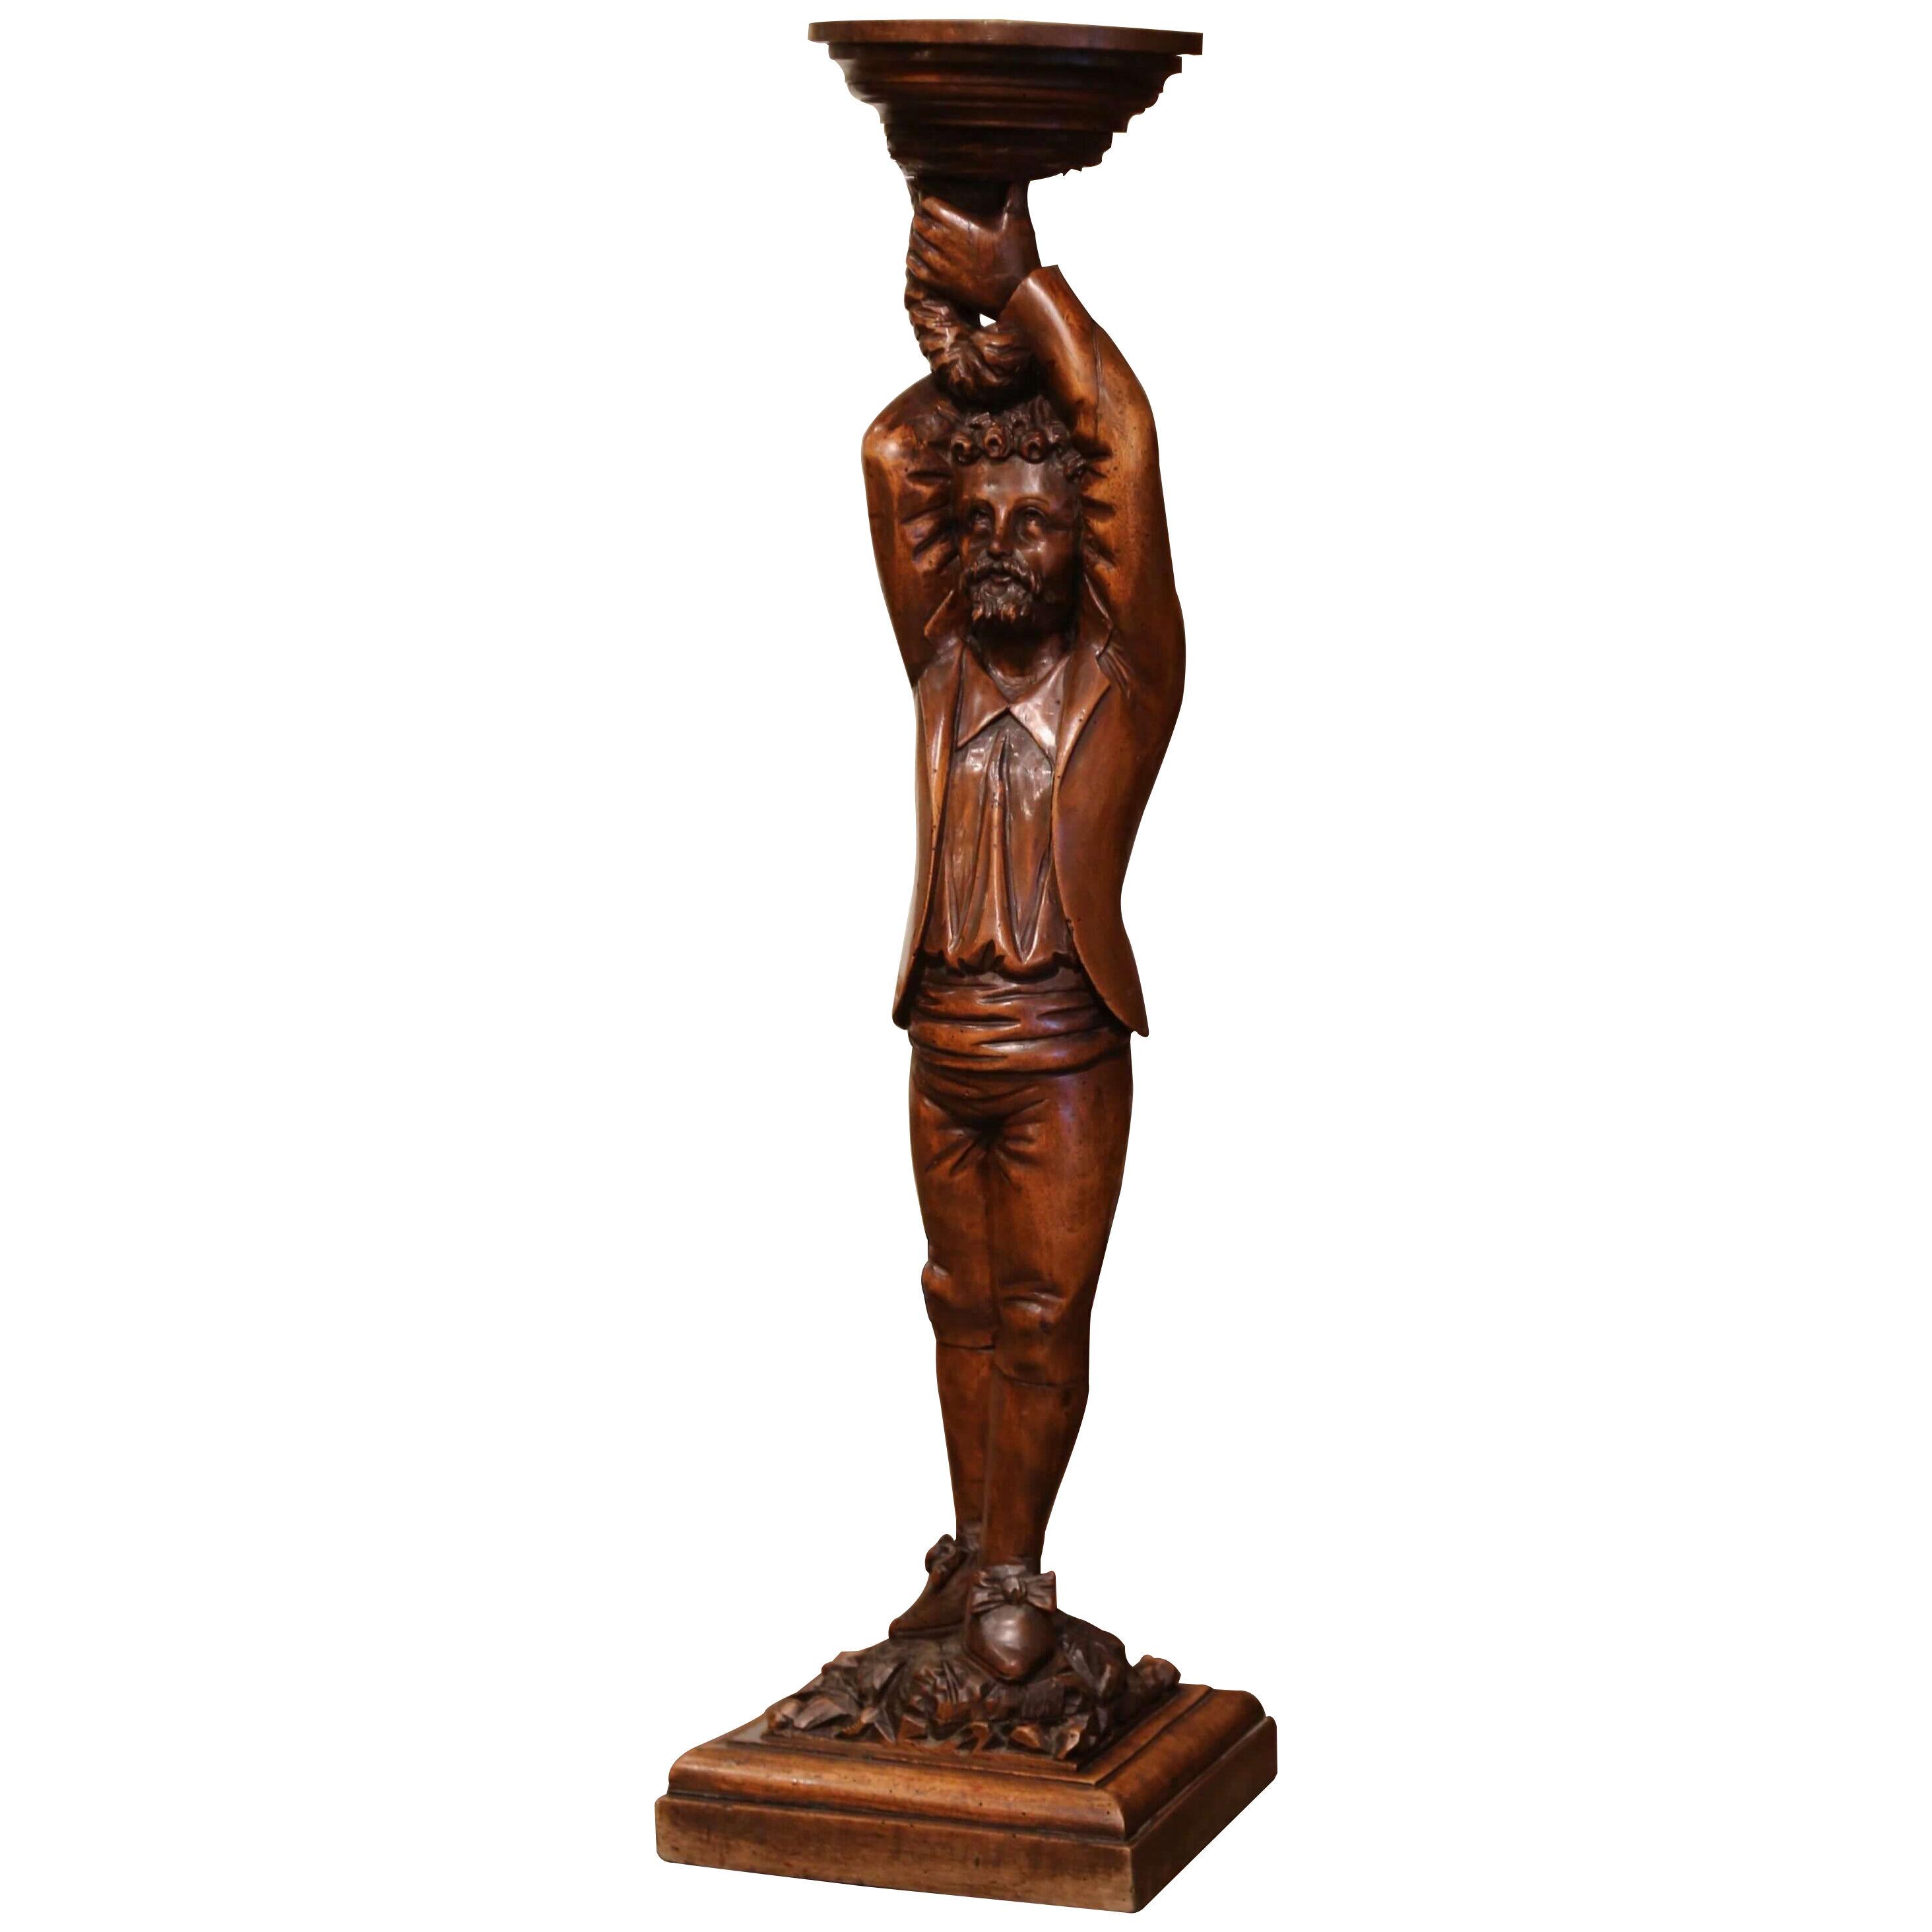 Mid-19th Century French Carved Walnut Pedestal Table with Gentleman Sculpture